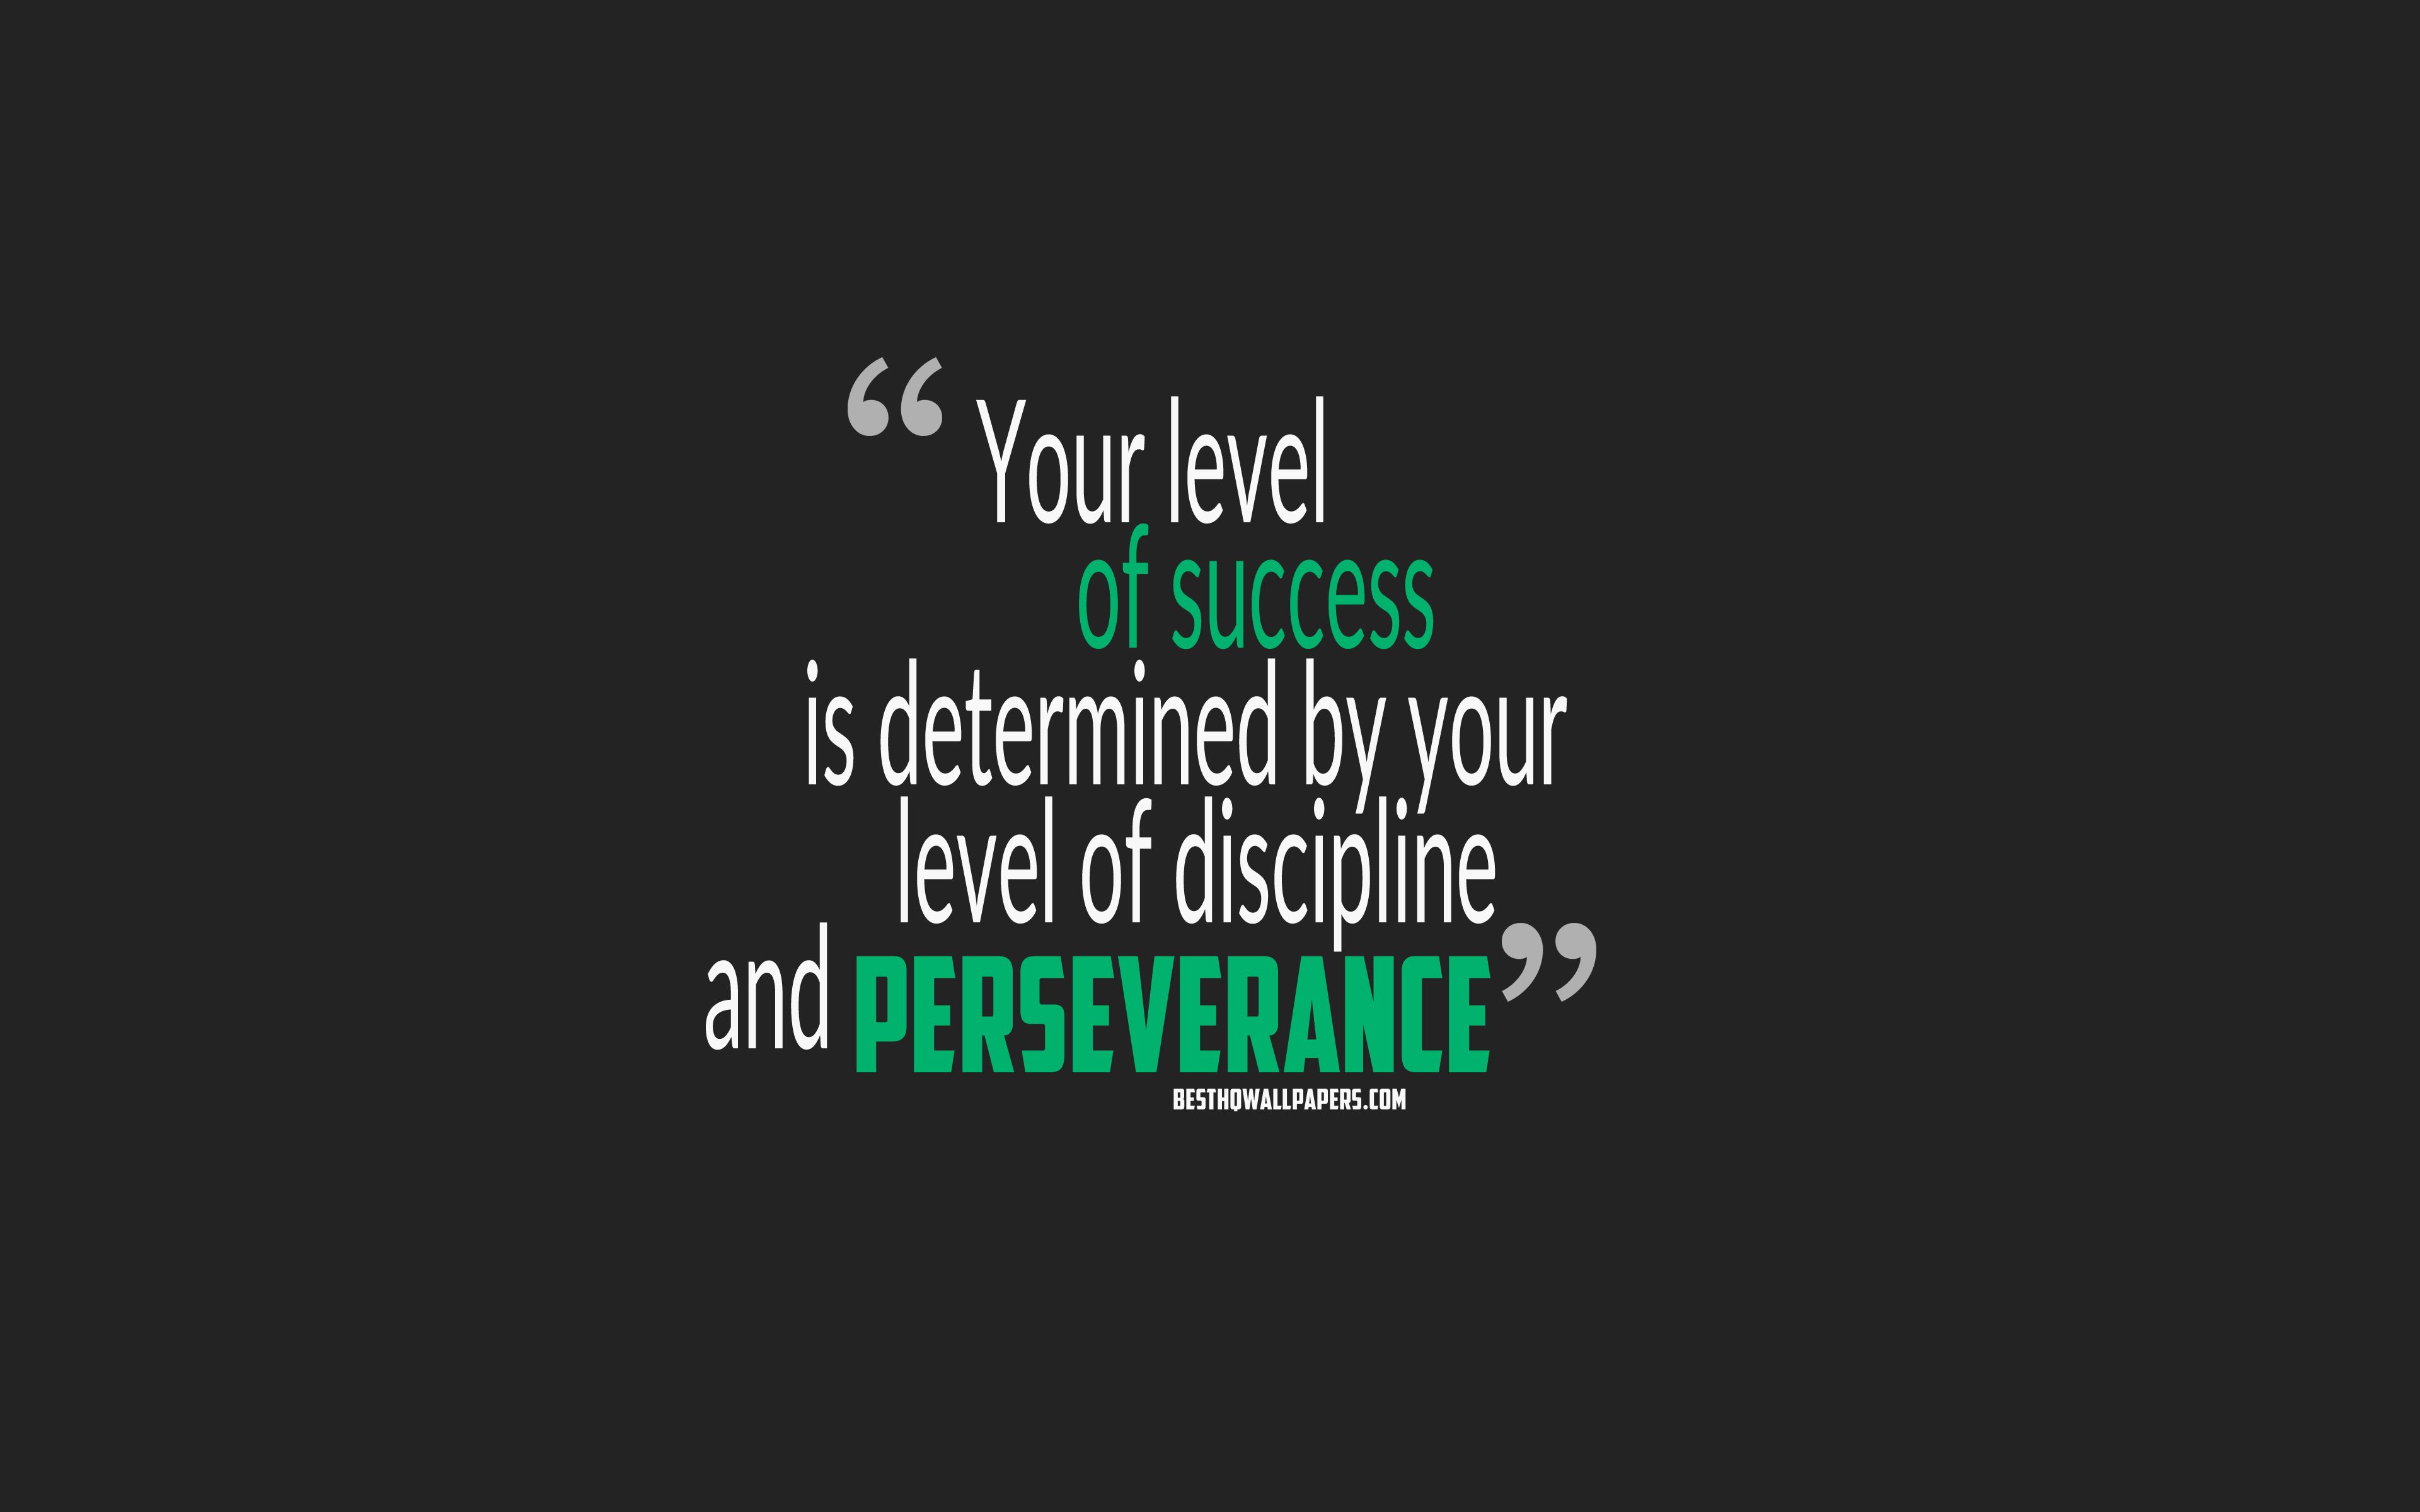 Download wallpaper Your level of success is determined by your level of discipline and perseverance, quotes about success, motivation, gray background, popular quotes for desktop with resolution 3840x2400. High Quality HD picture